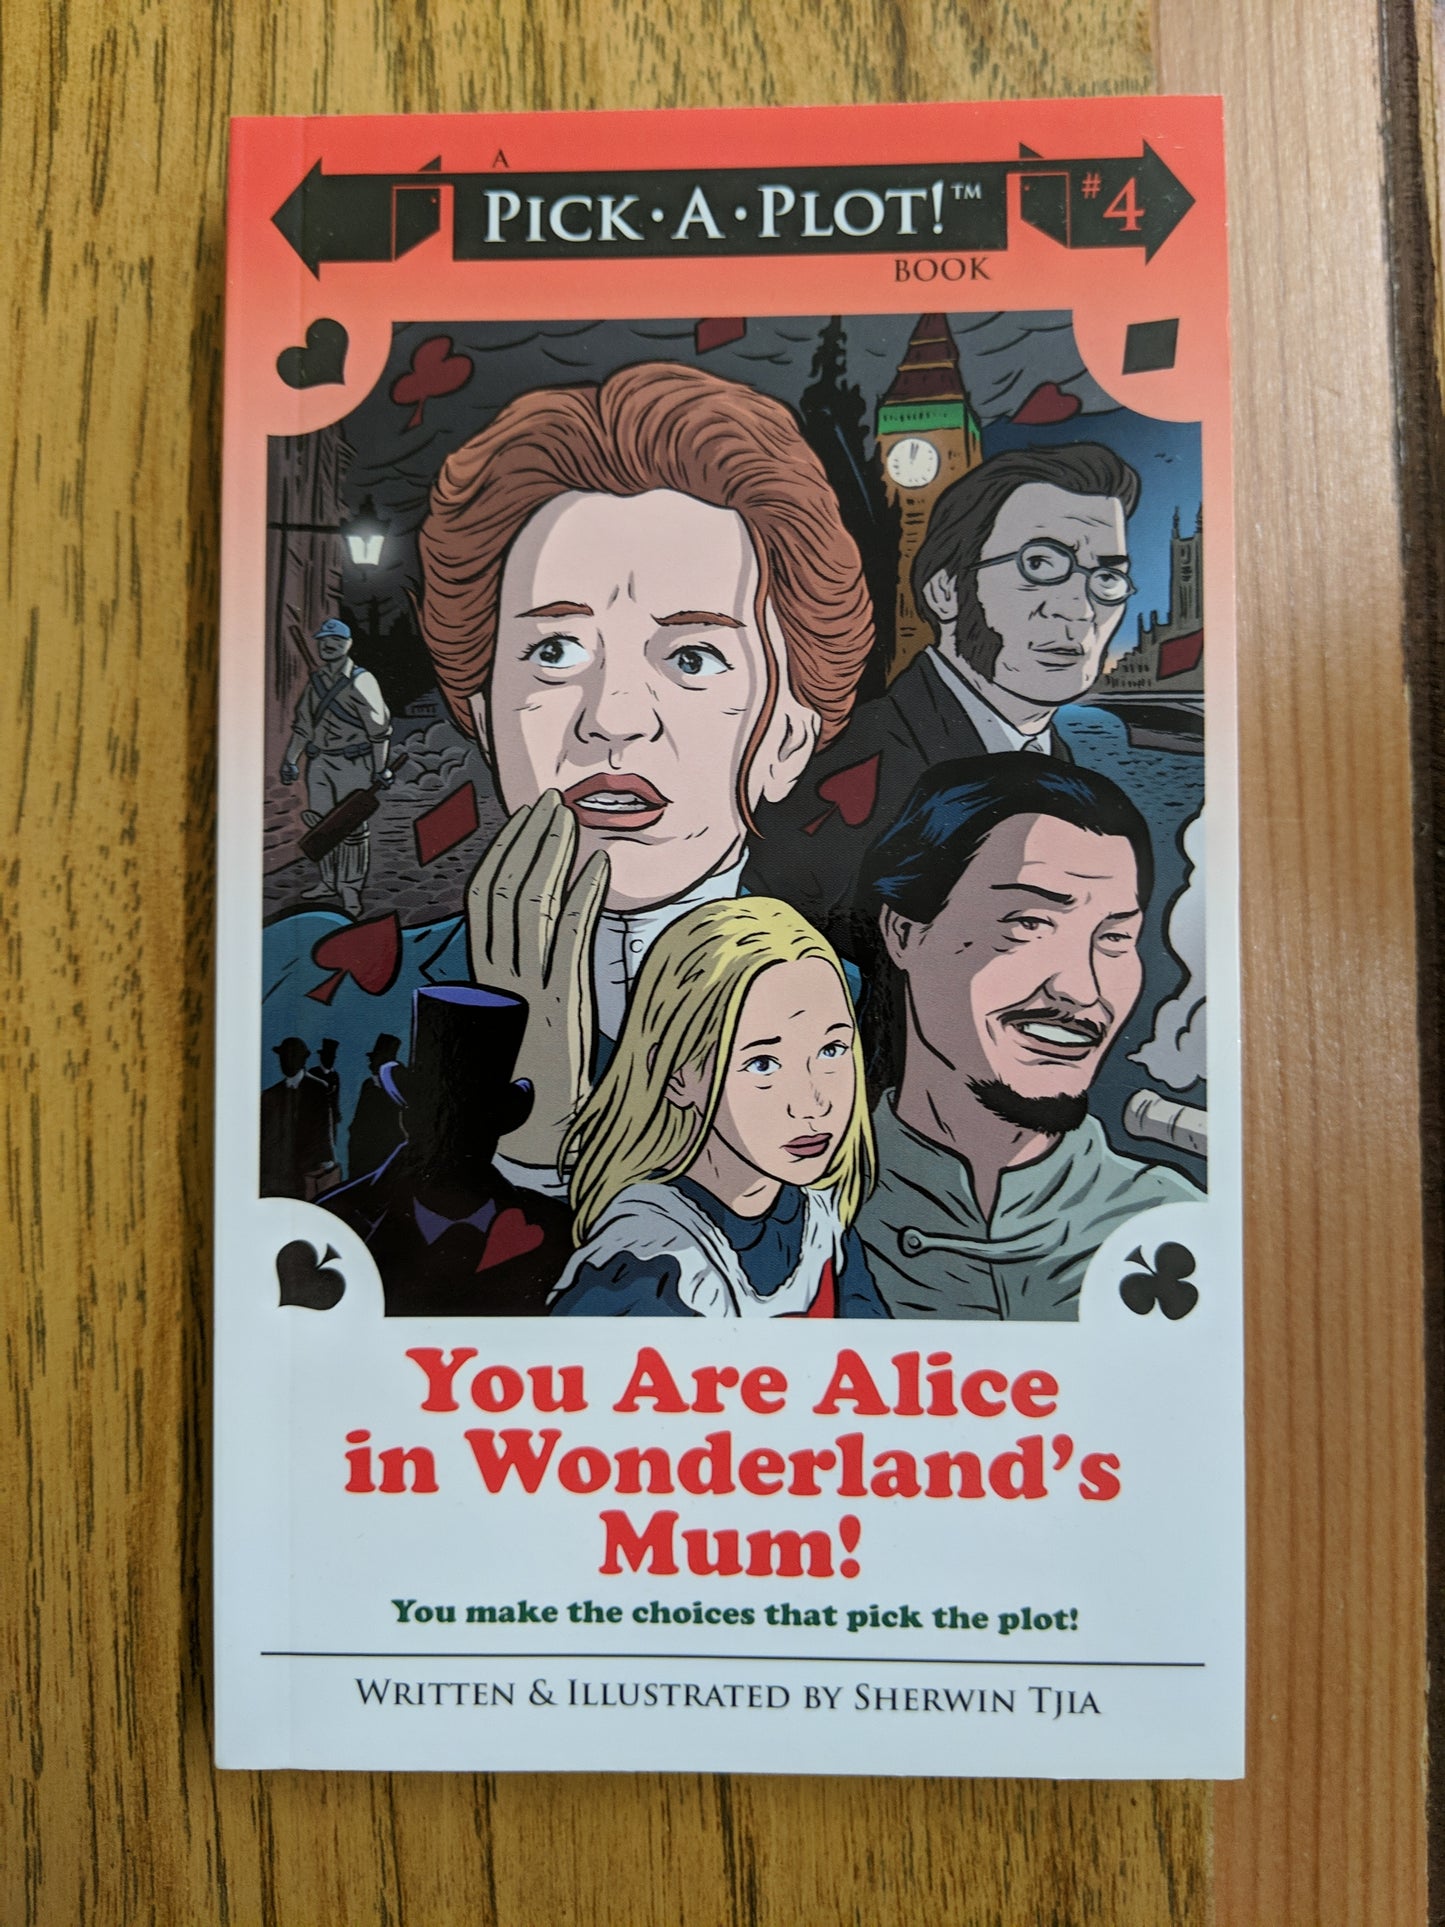 You Are Alice in Wonderland's Mum! (Pick A Plot Book #4)